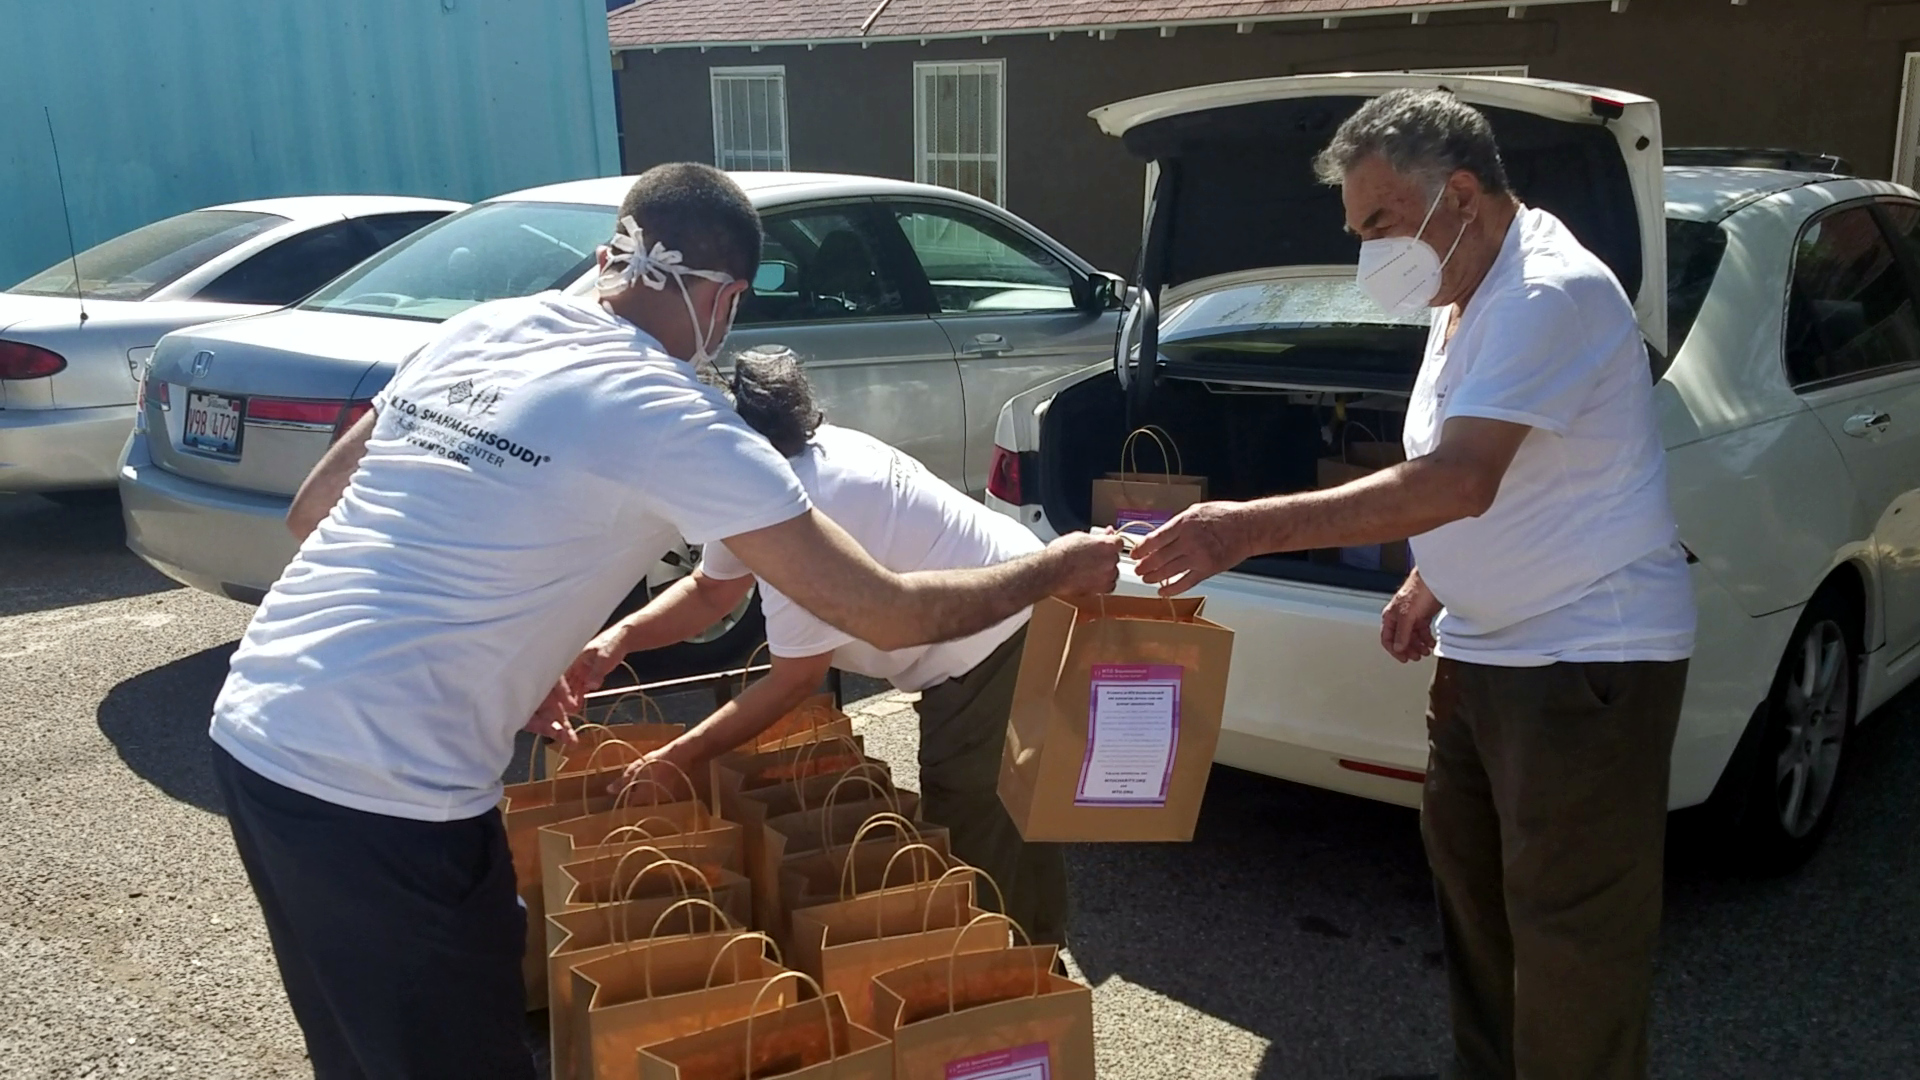 M.T.O. Abuquerque Donates Food to Local Shelter